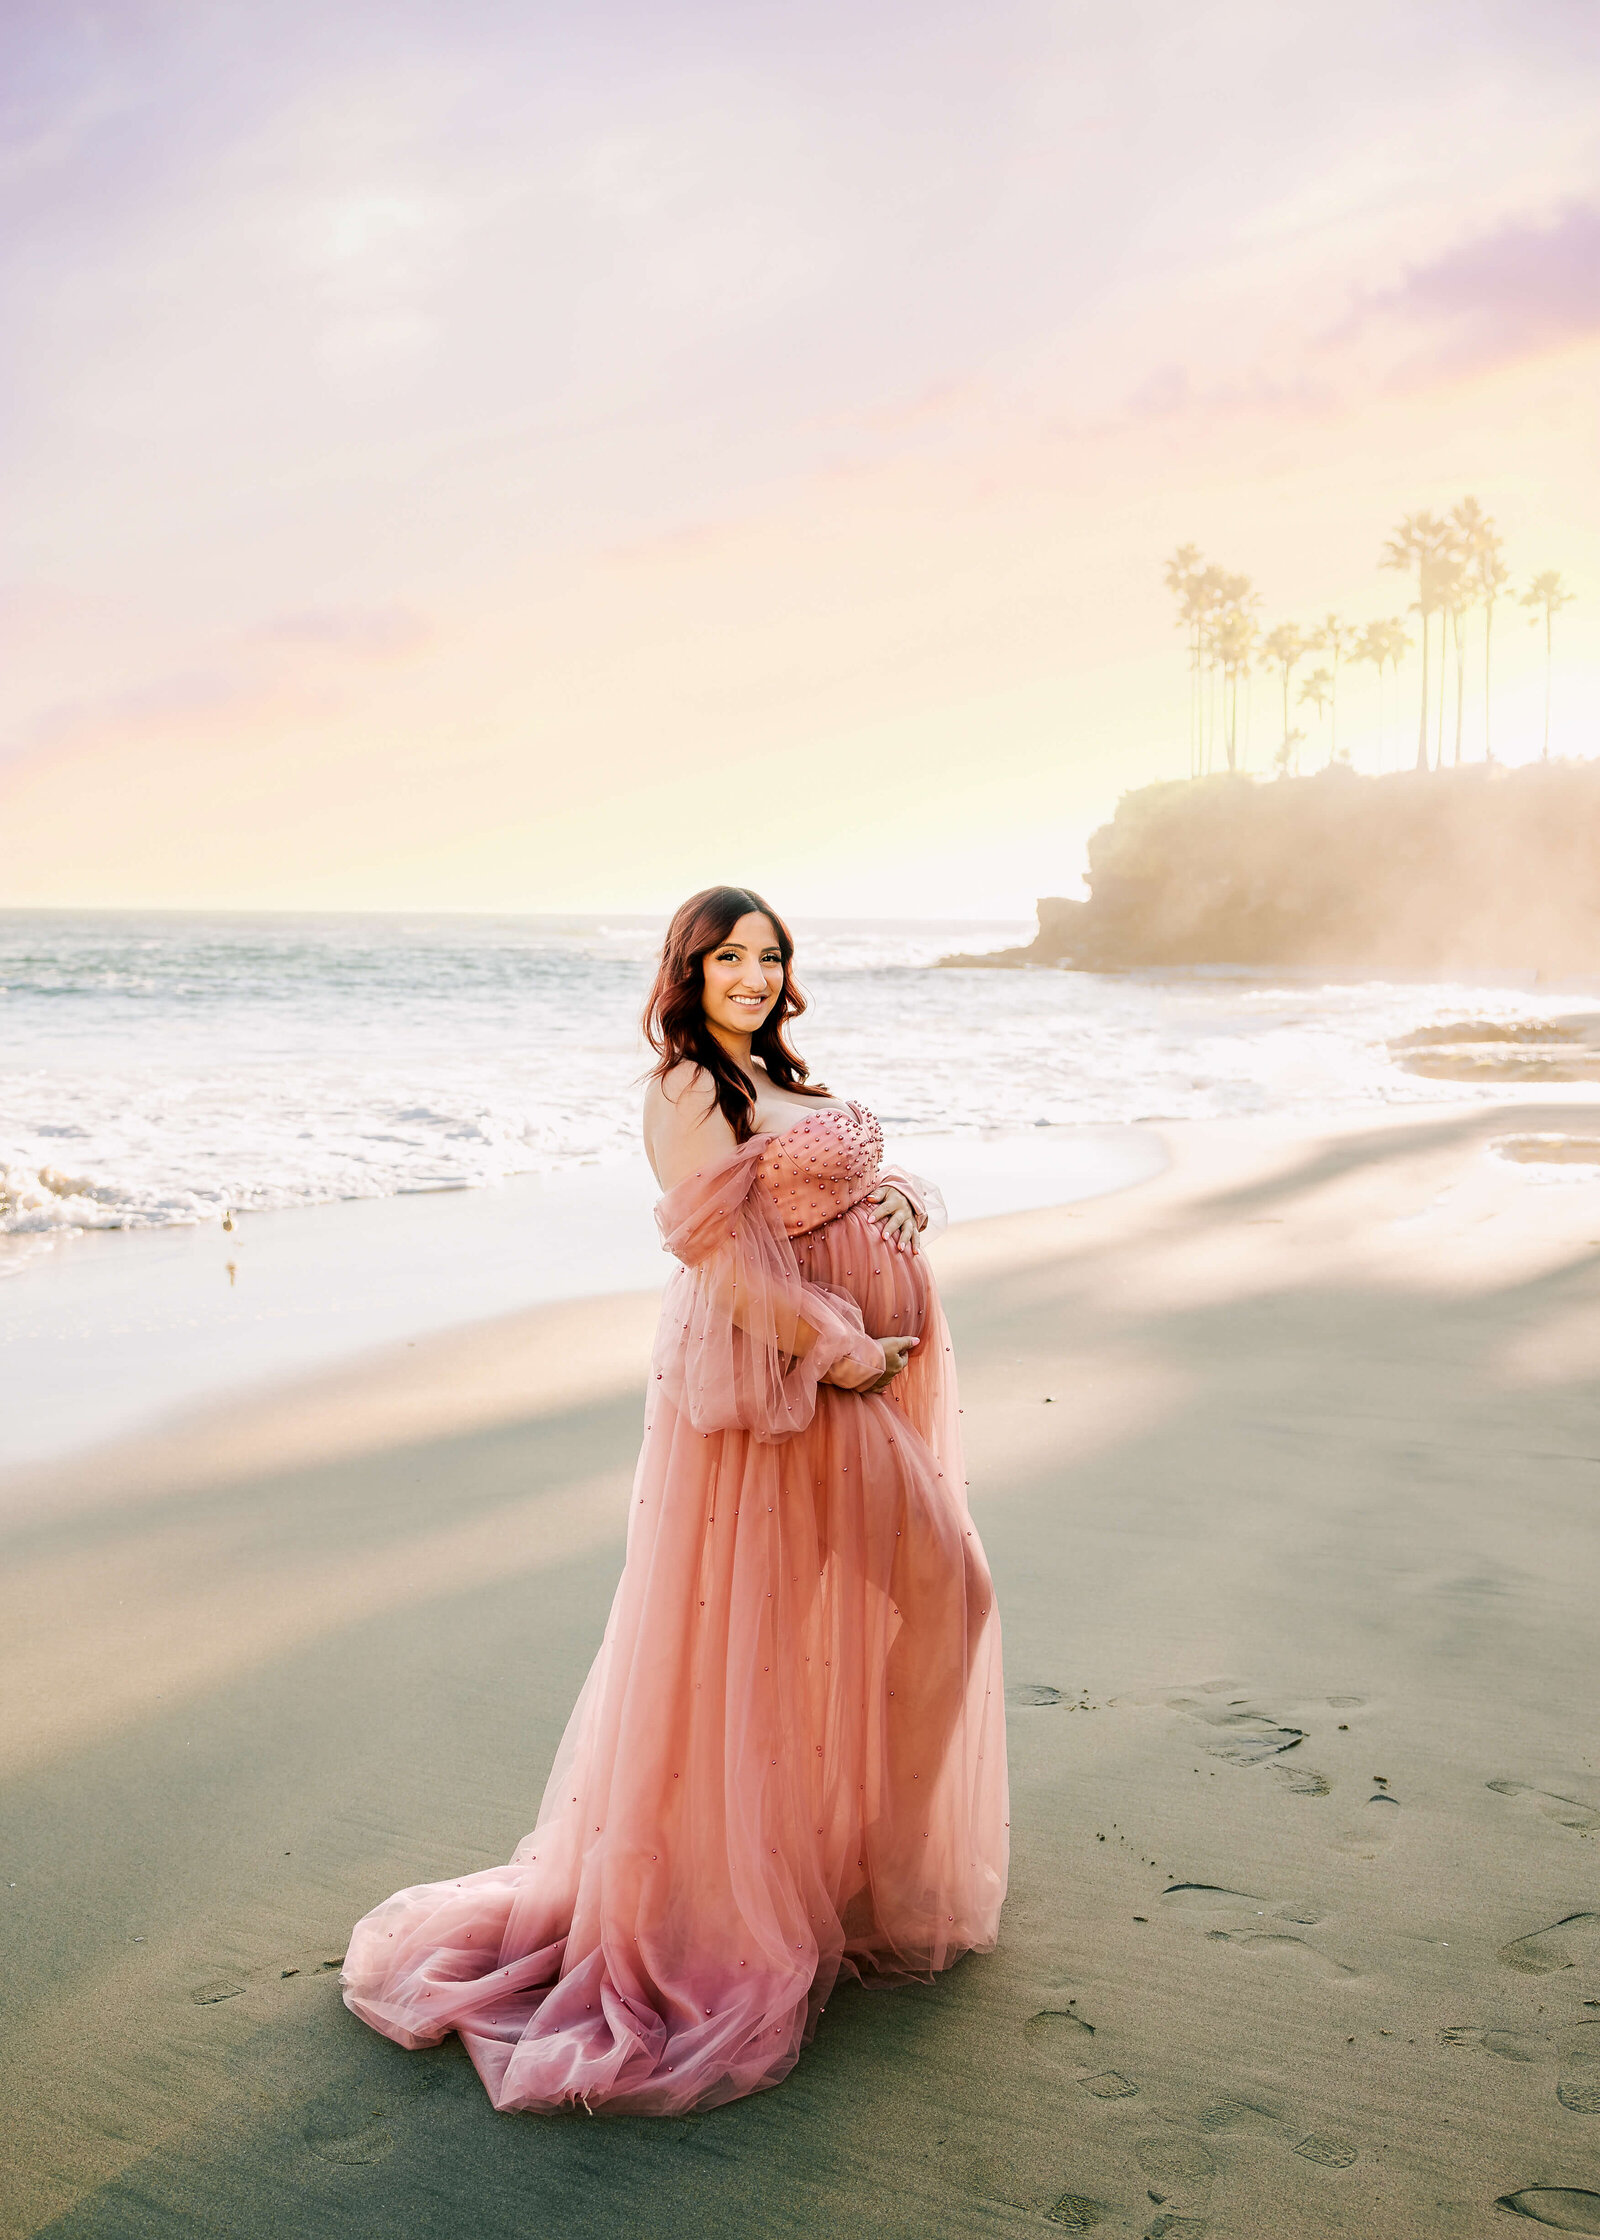 Mom holding belly at laguna beach maternity session wearing pink pearl dress smiling at sunset.